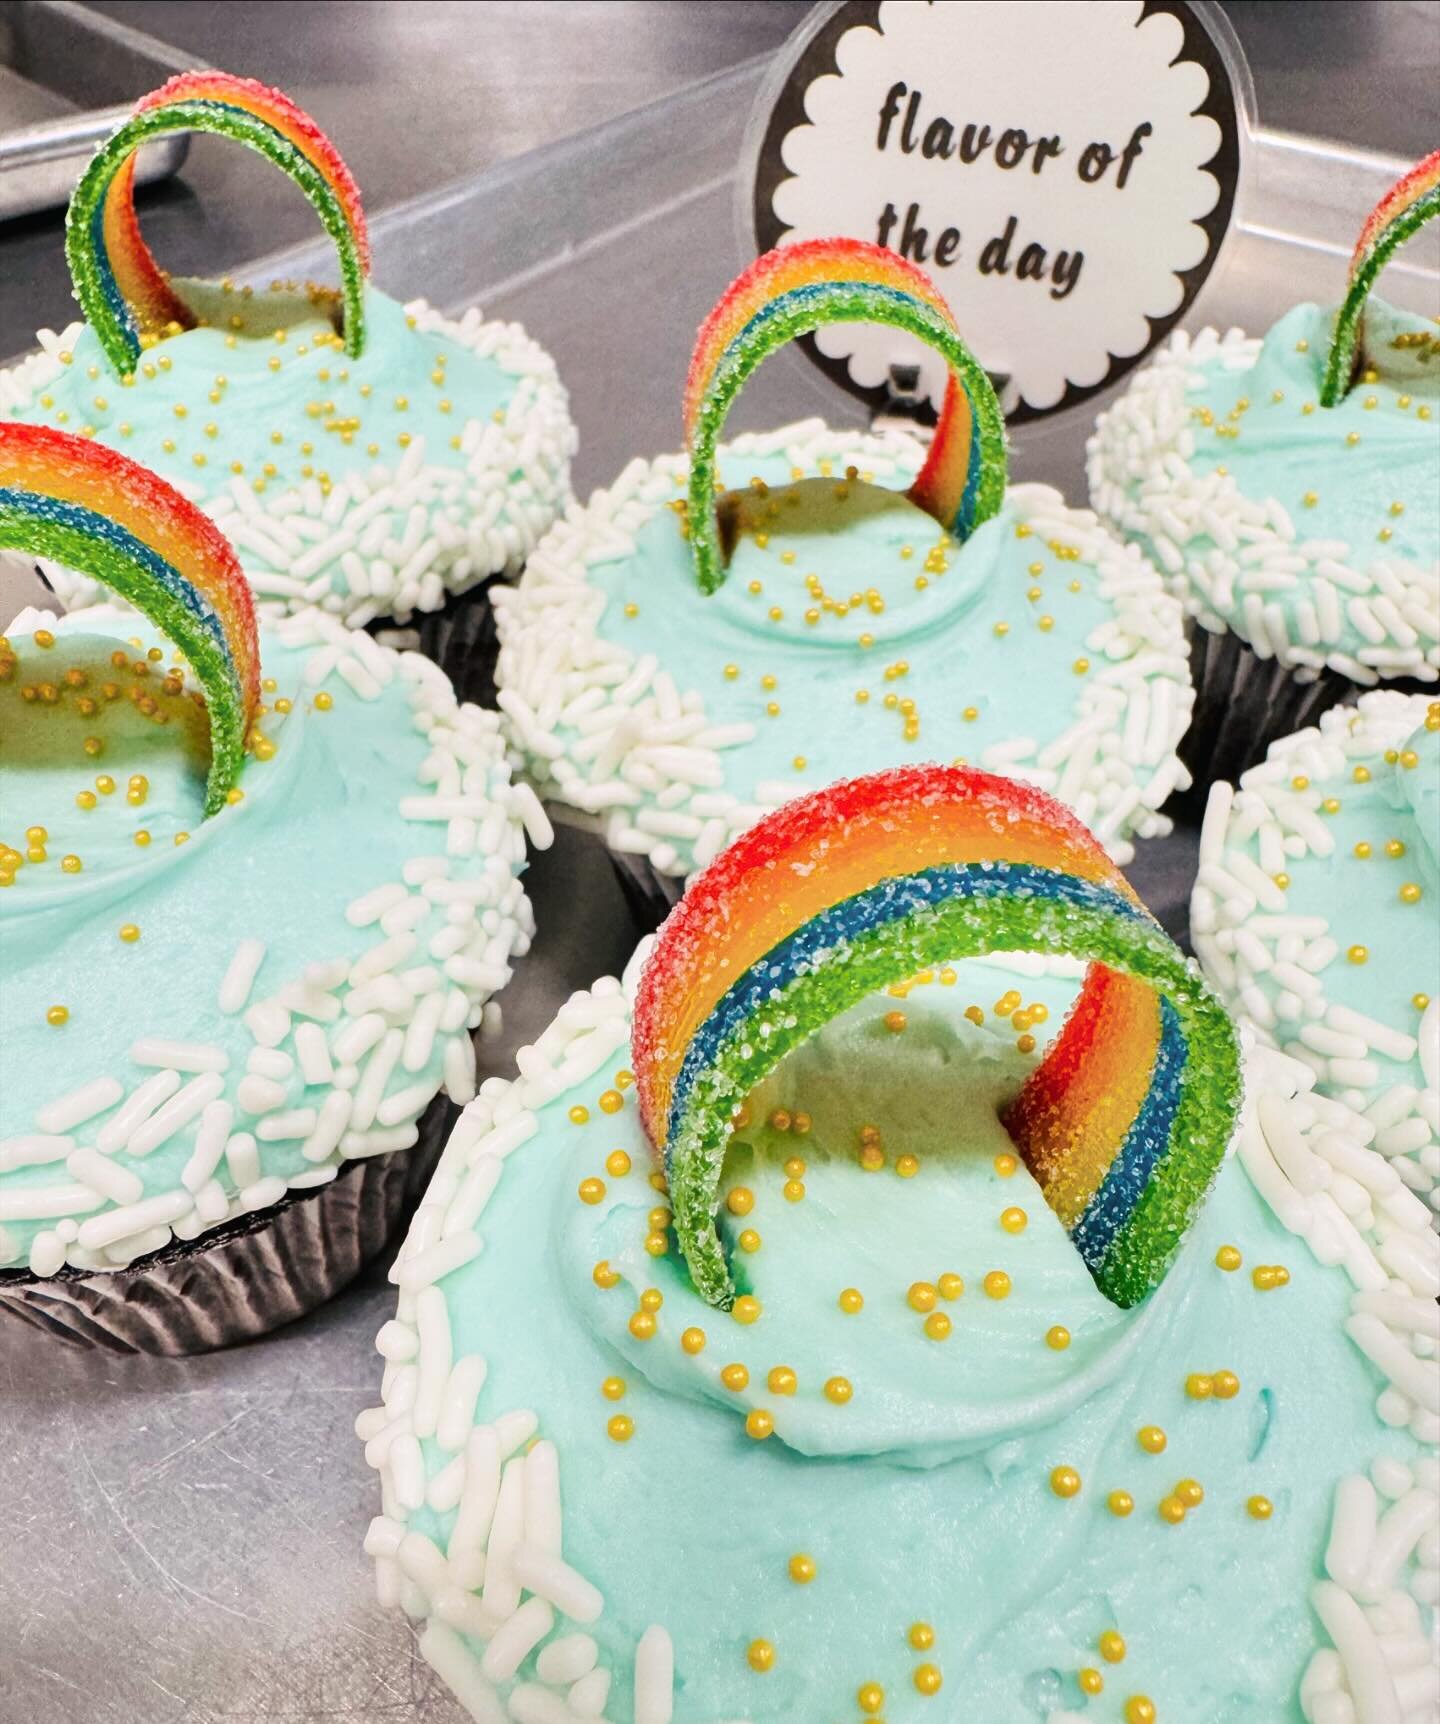 We have some fun additions to our case this weekend! Our Flavor of the Week is back, Chocolate Guinness with Irish Cream Buttercream and our Flavor of the Day is a special pot of gold, leprechaun inspired Chocolate / Vanilla Buttercream. It would be 